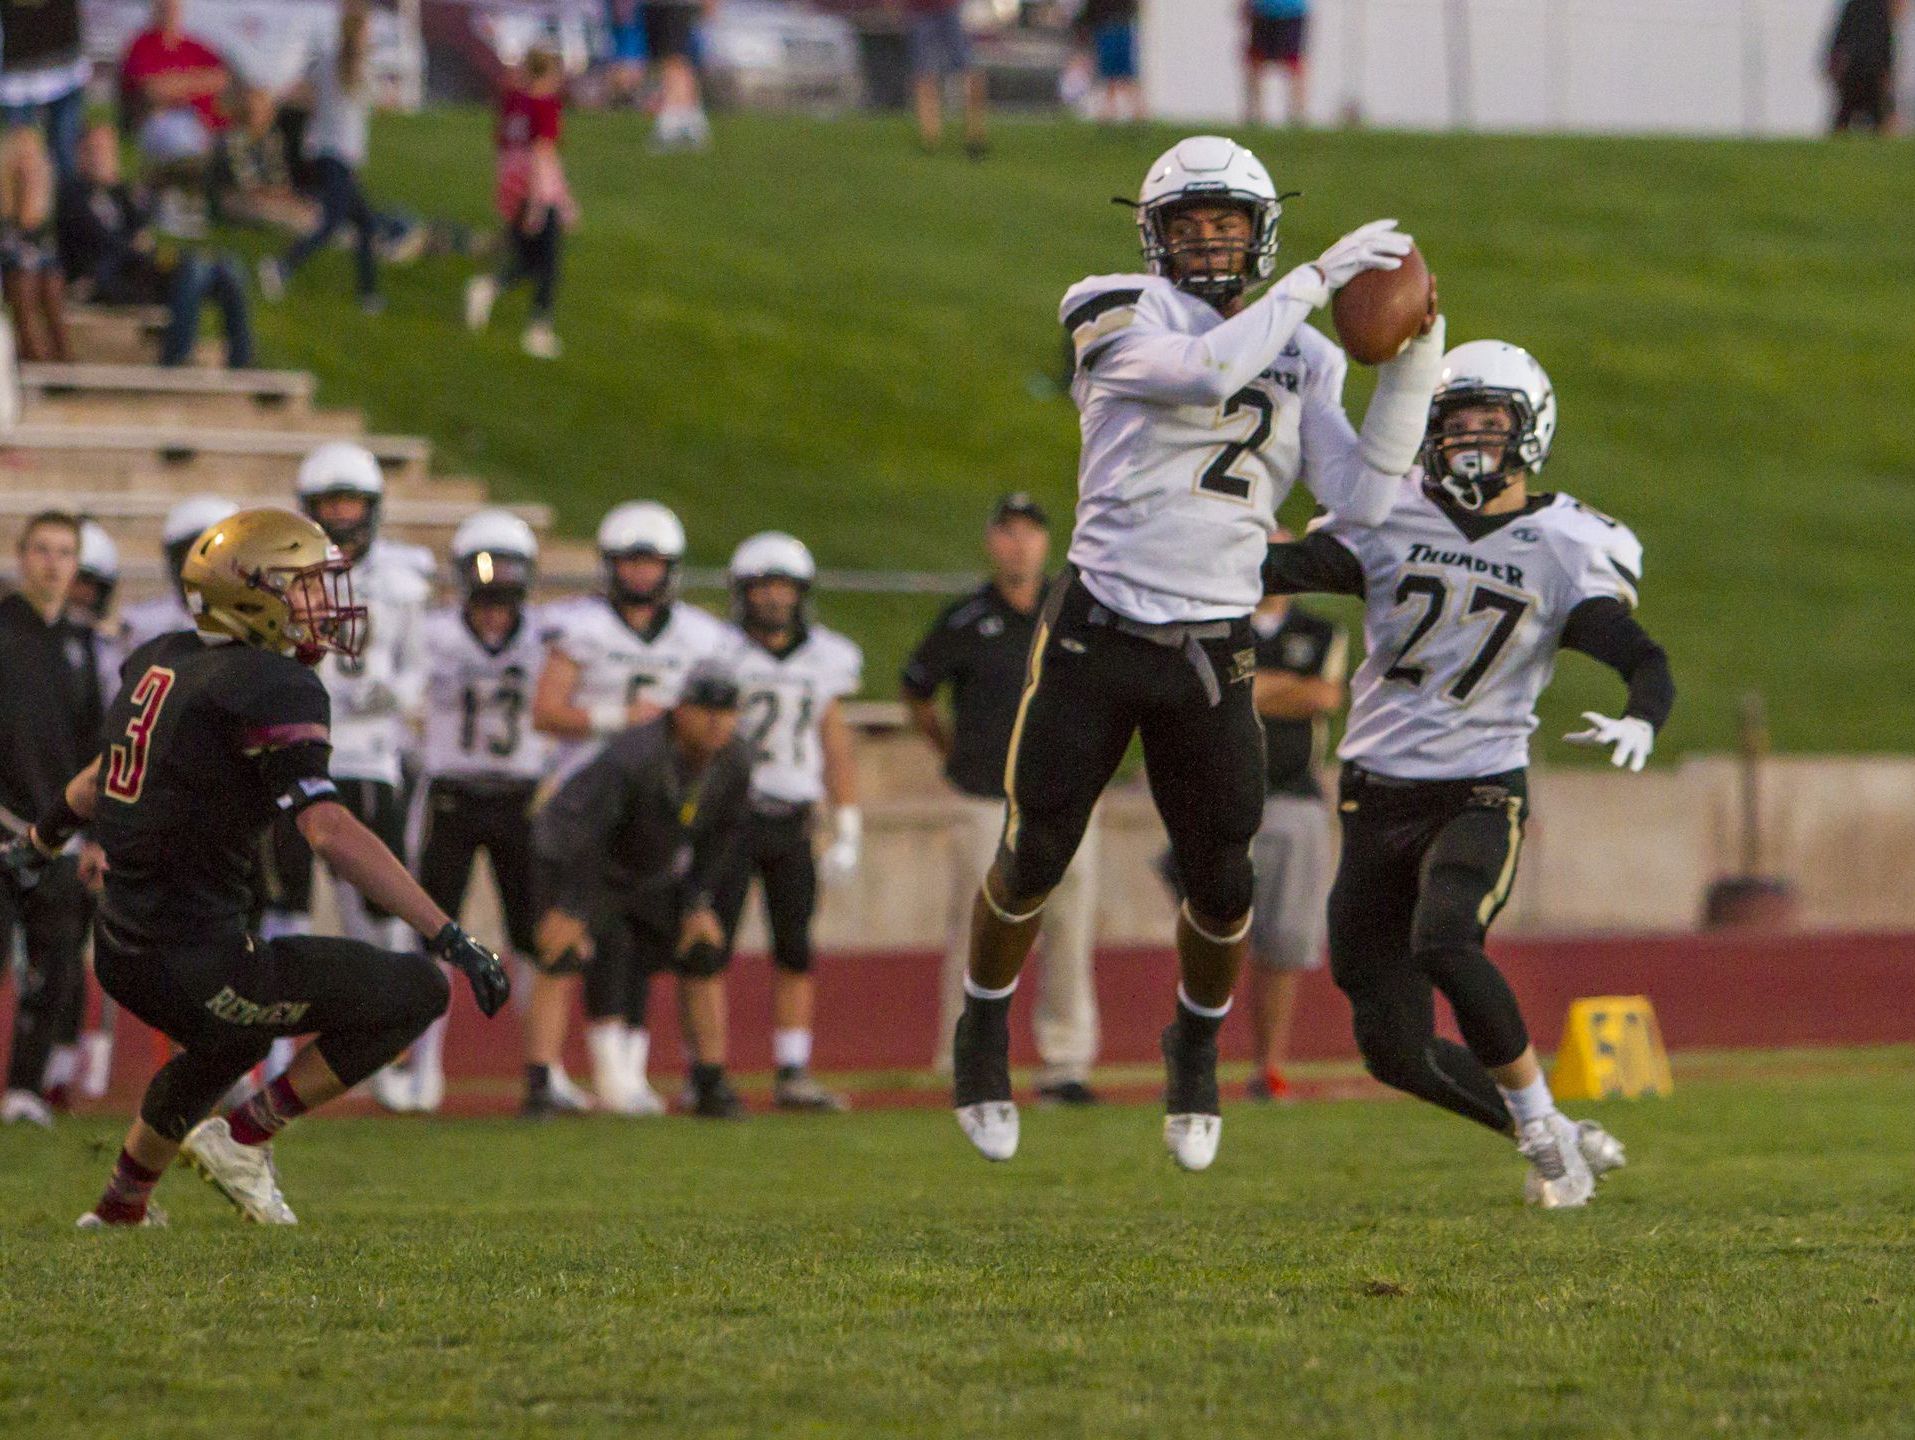 Desert Hills' Nephi Sewell makes an interception and returned it for a touchdown in a game against Cedar earlier this season.